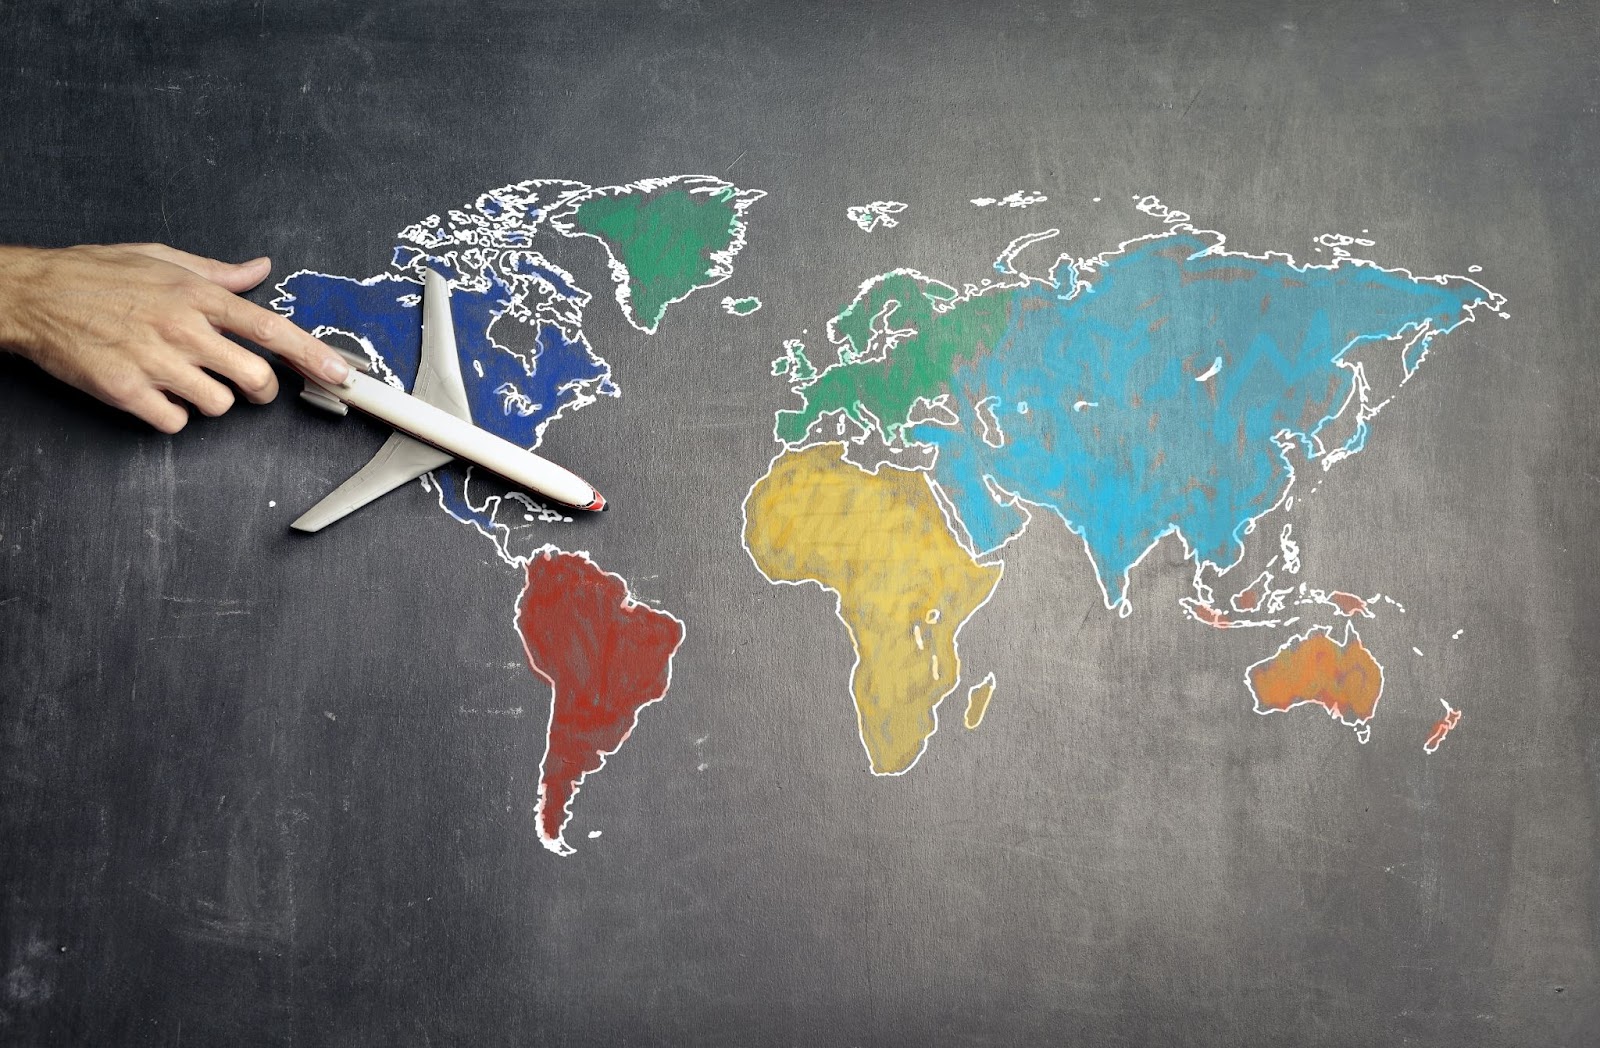 Picture of the world map on a blackboard.